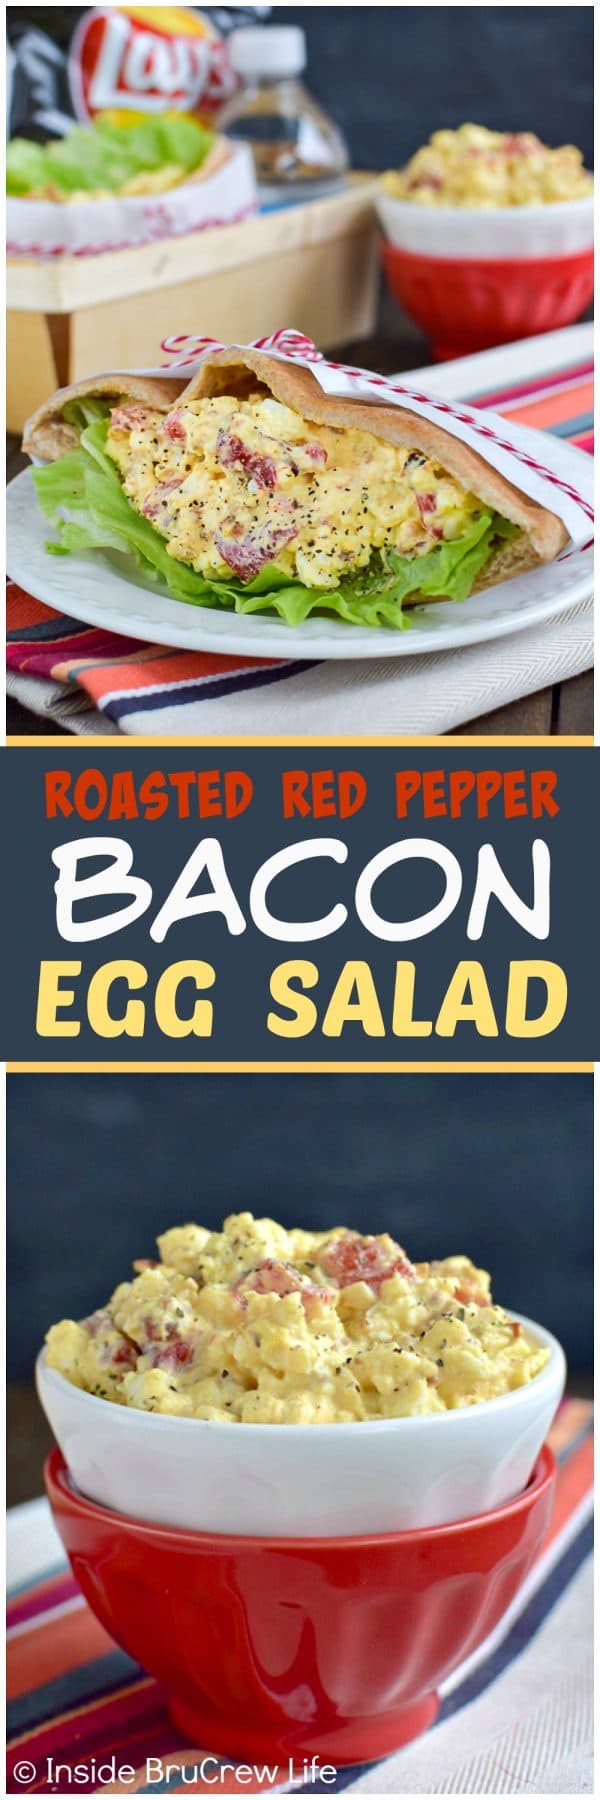 Two pictures of bacon egg salad with a gray text box.